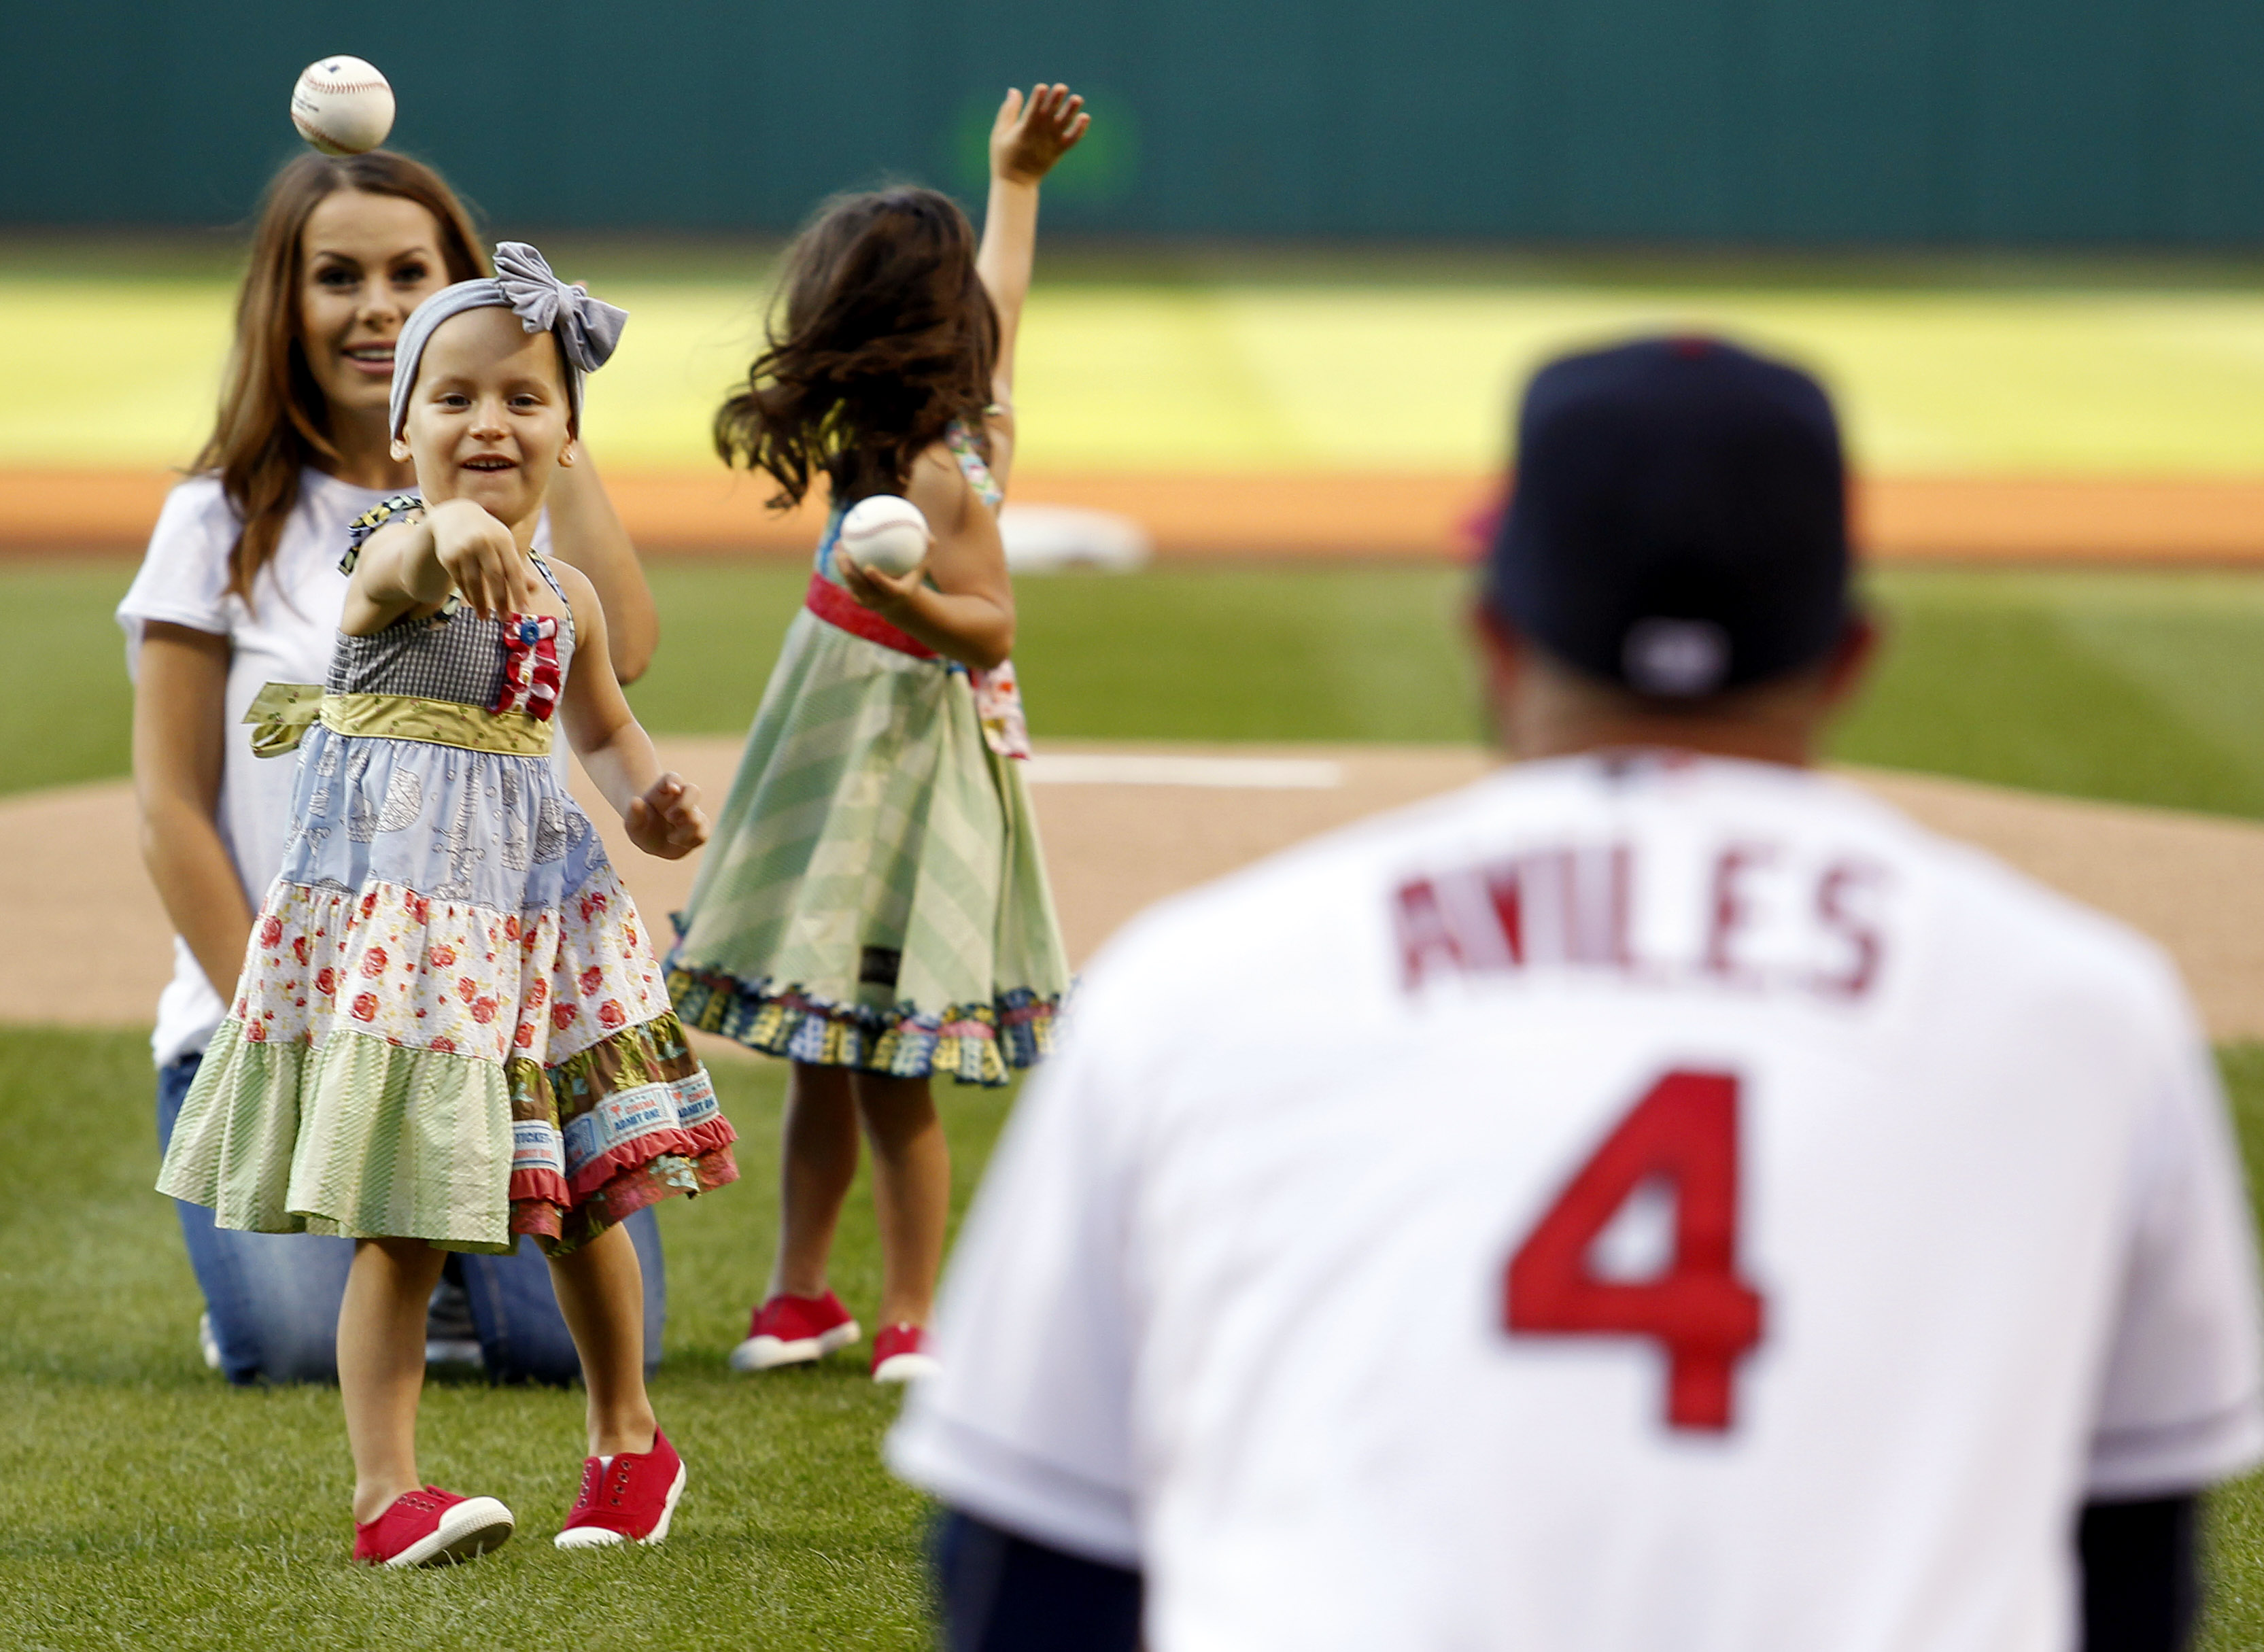 Cleveland Indians' Mike Aviles catches the ceremonial first pitch from his daughter Adriana as his wife, Jessy, watches prior to the Indians' baseball game against the New York Yankees on Thursday, Aug.13, 2015, in Cleveland. (AP Photo/Aaron Josefczyk